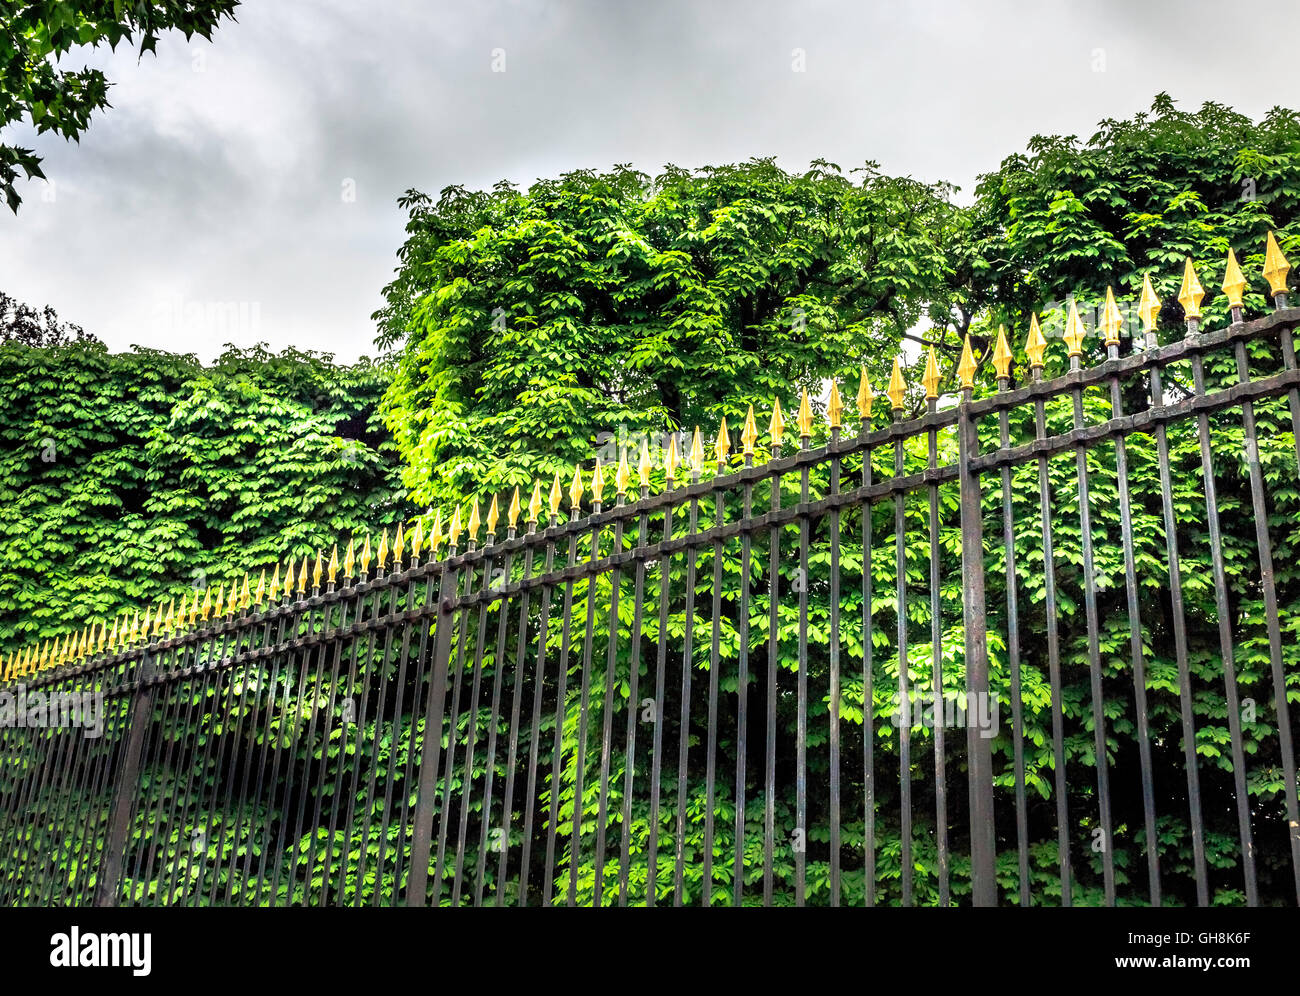 Wrought iron fence with spearhead design against tall green bushes Stock Photo